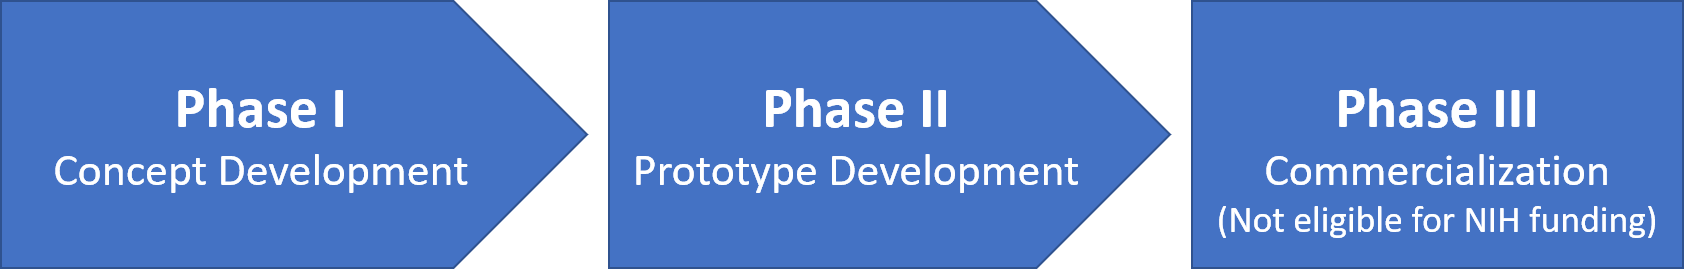 Phases of the Small Business Programs: Phase 1 - Concept Development; Phase 2 - Prototype Development; and Phase 3 - Commercialization (Not Eligible for NIH Funding)